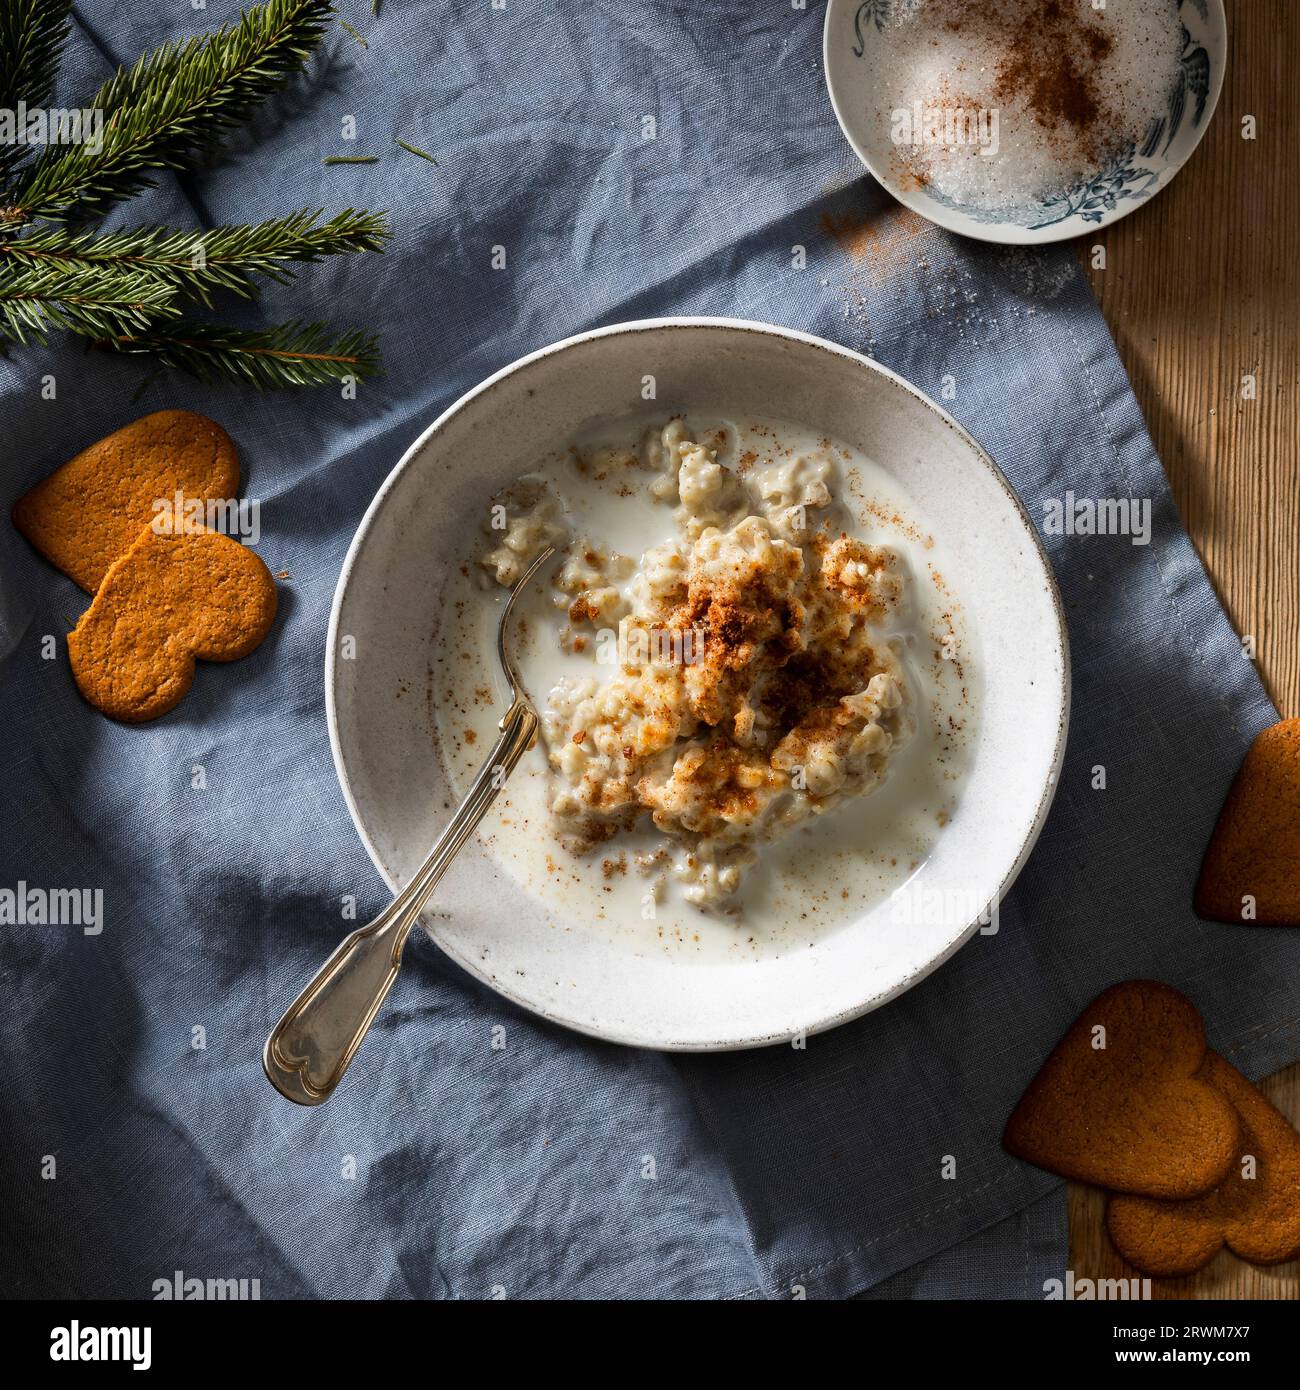 Top view of a bowl with rice porridge. Stock Photo